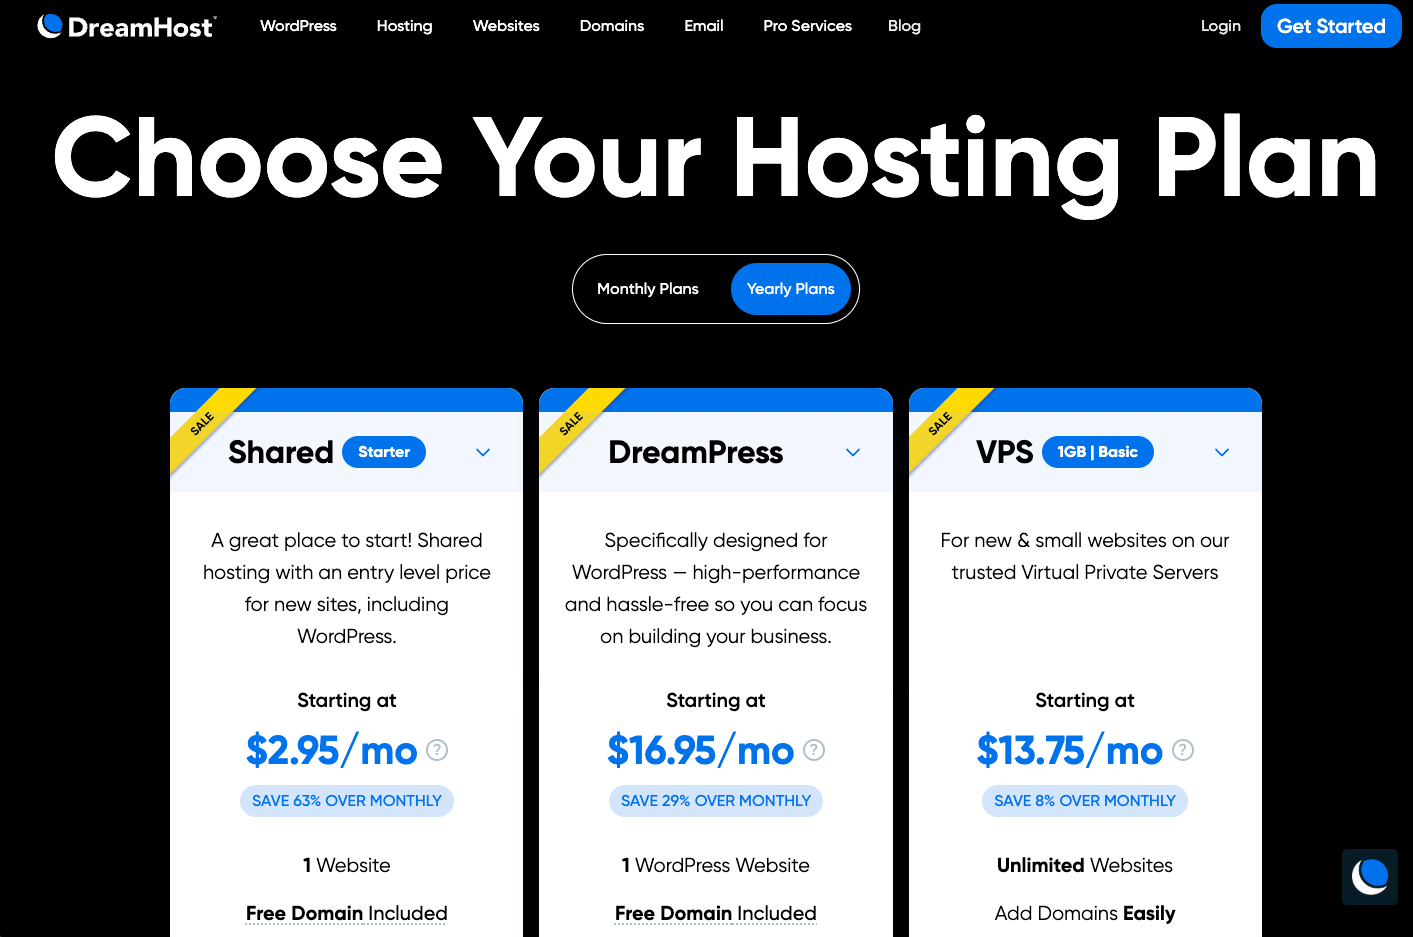 DreamHost, one of the web hosting providers also offer free email account with some of it's plans.